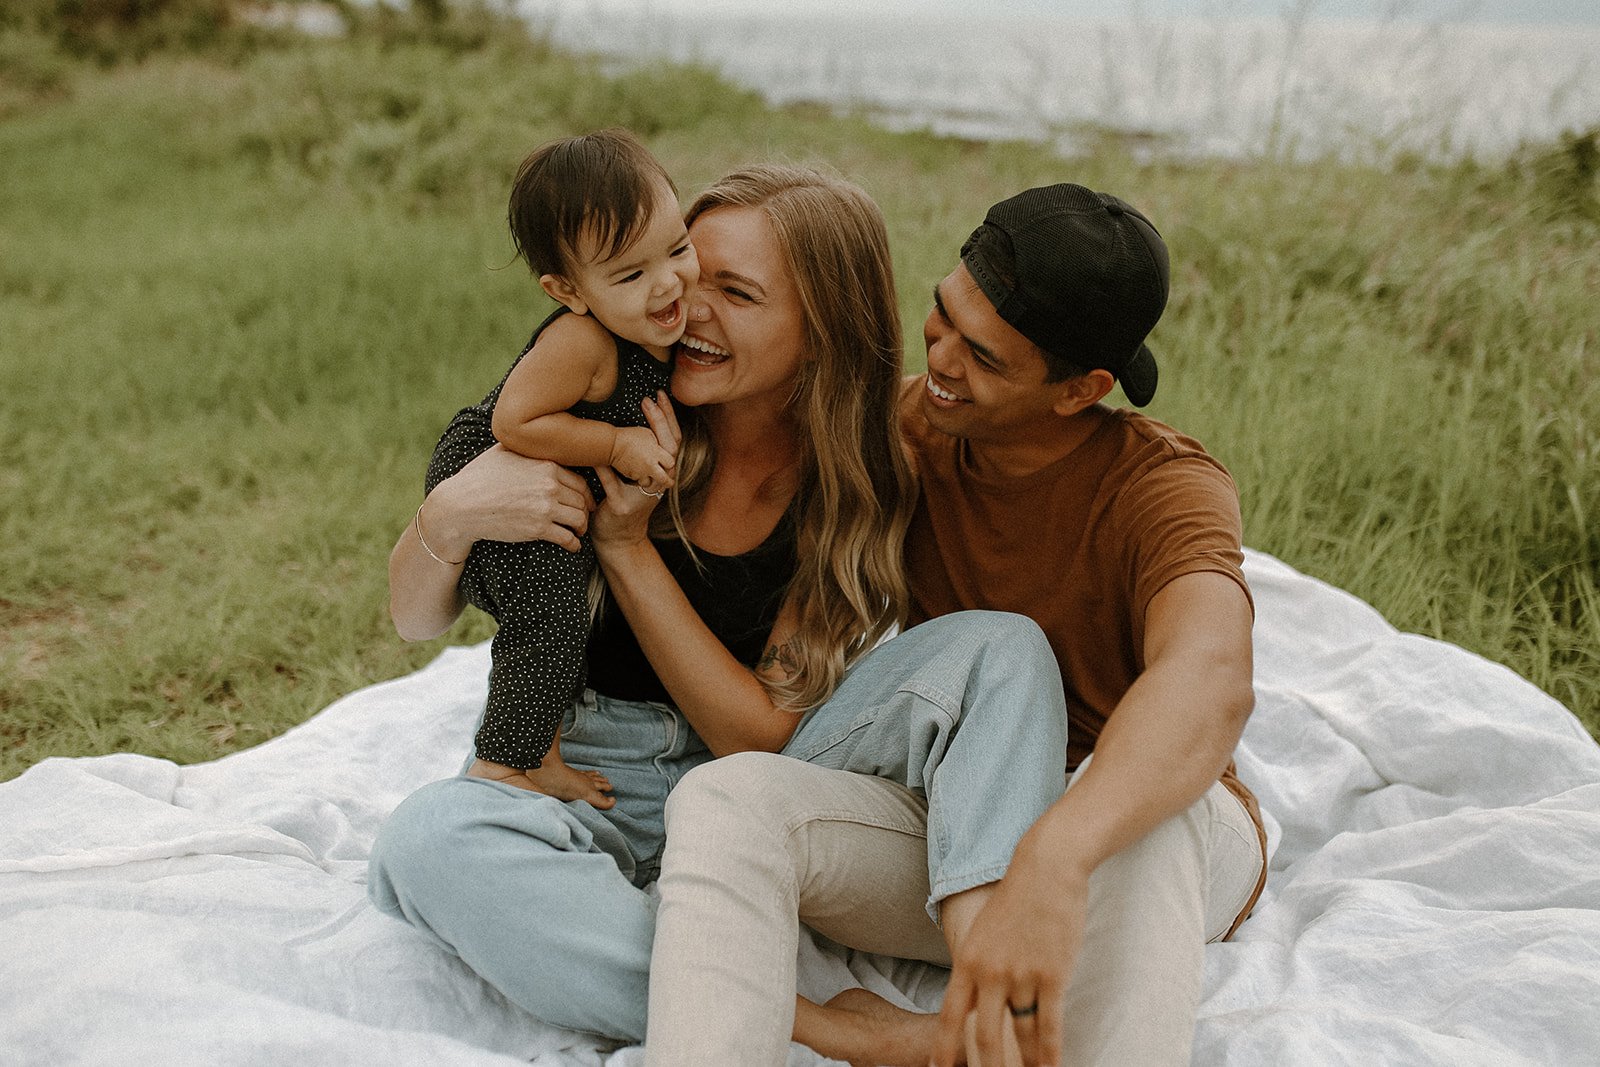 Hayley and Christian with their toddler at Makua Beach in Oahu, Hawaii